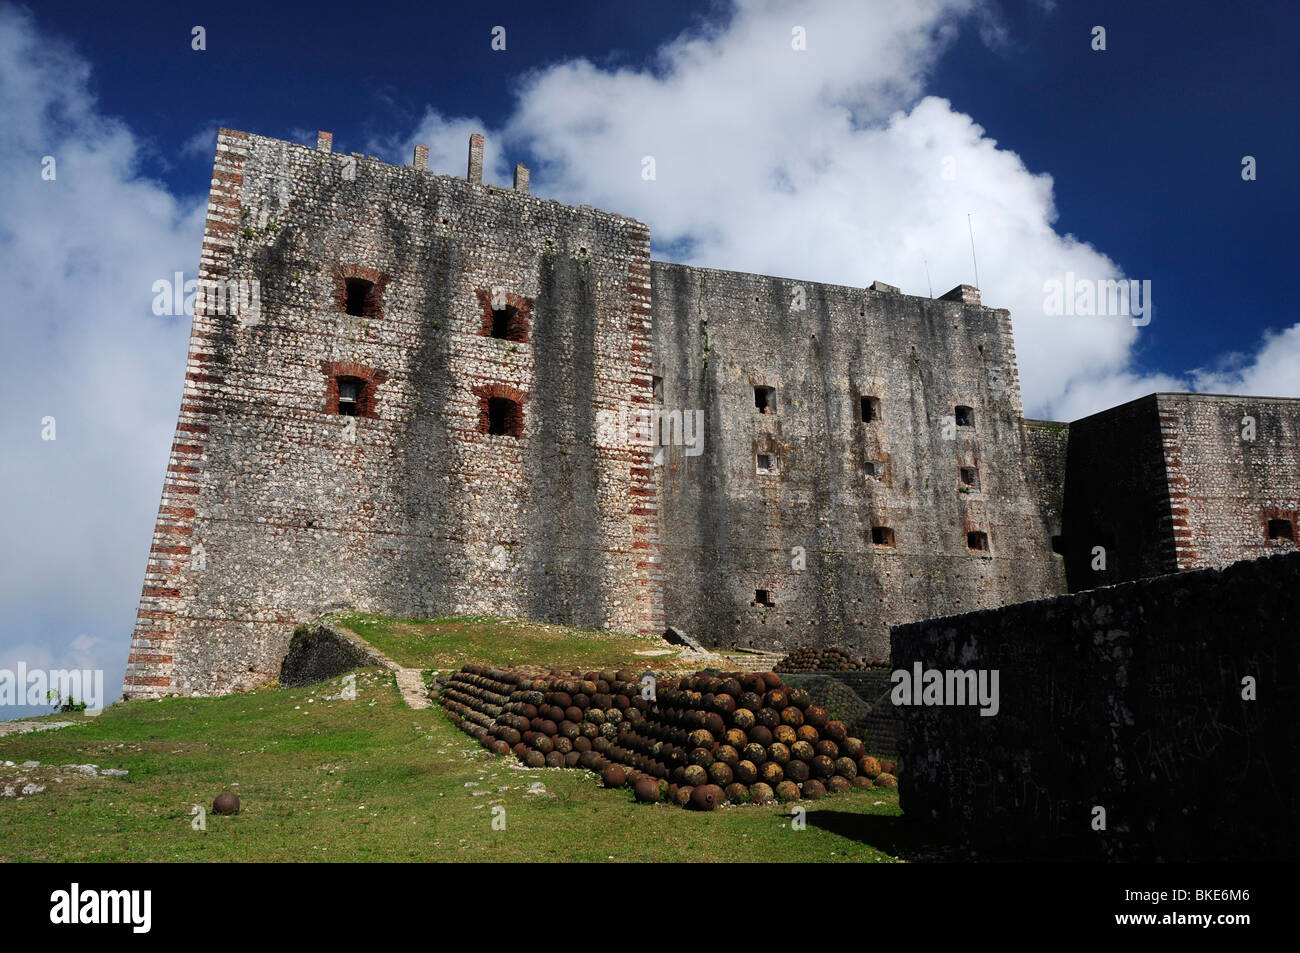 Pile of Cannonballs in front of the Citadel in Northern Haiti, Milot Stock Photo